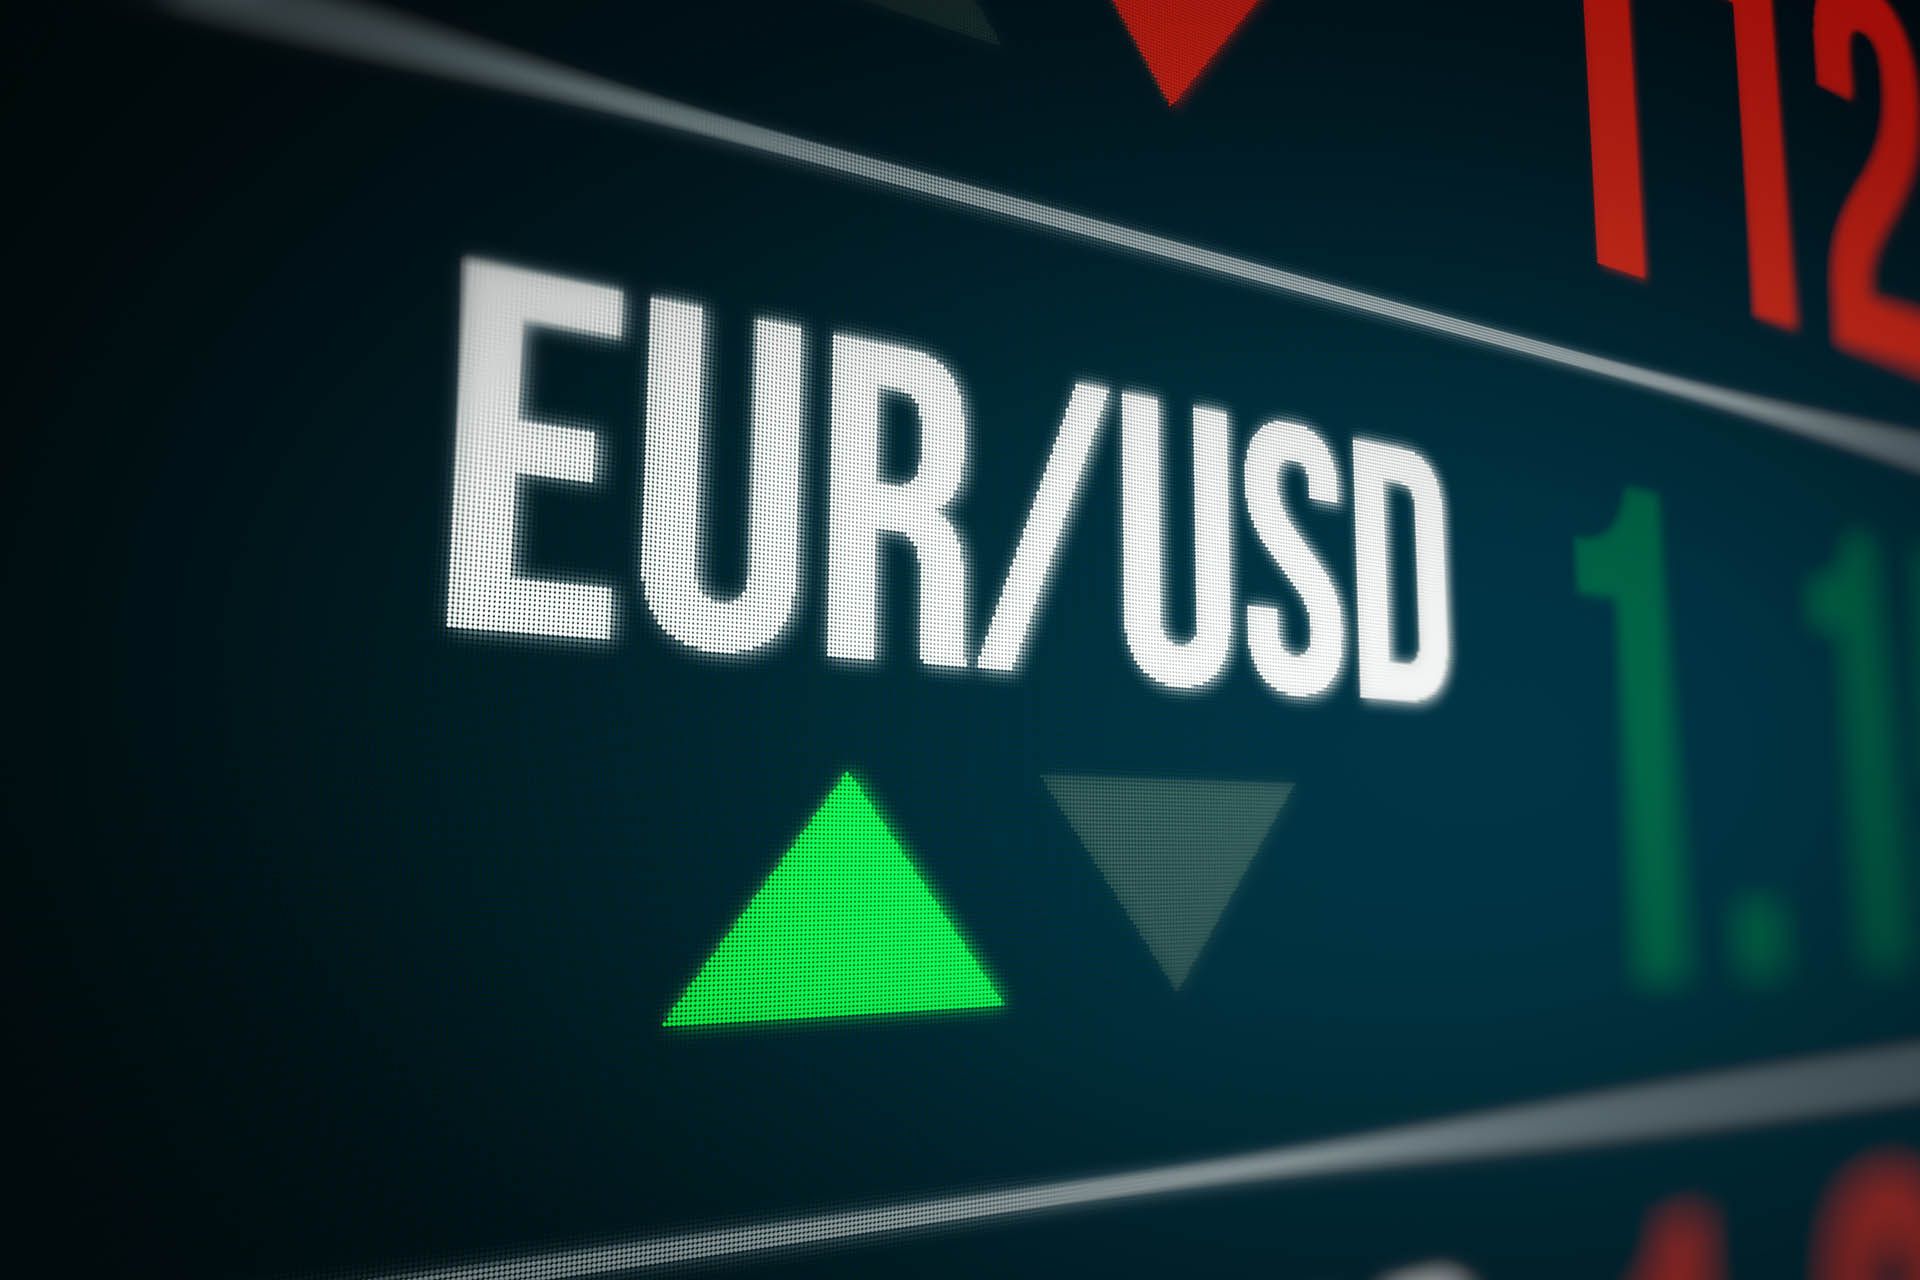 July, 17 - EUR/USD is up smalls and trades closer to the 1.14 mark